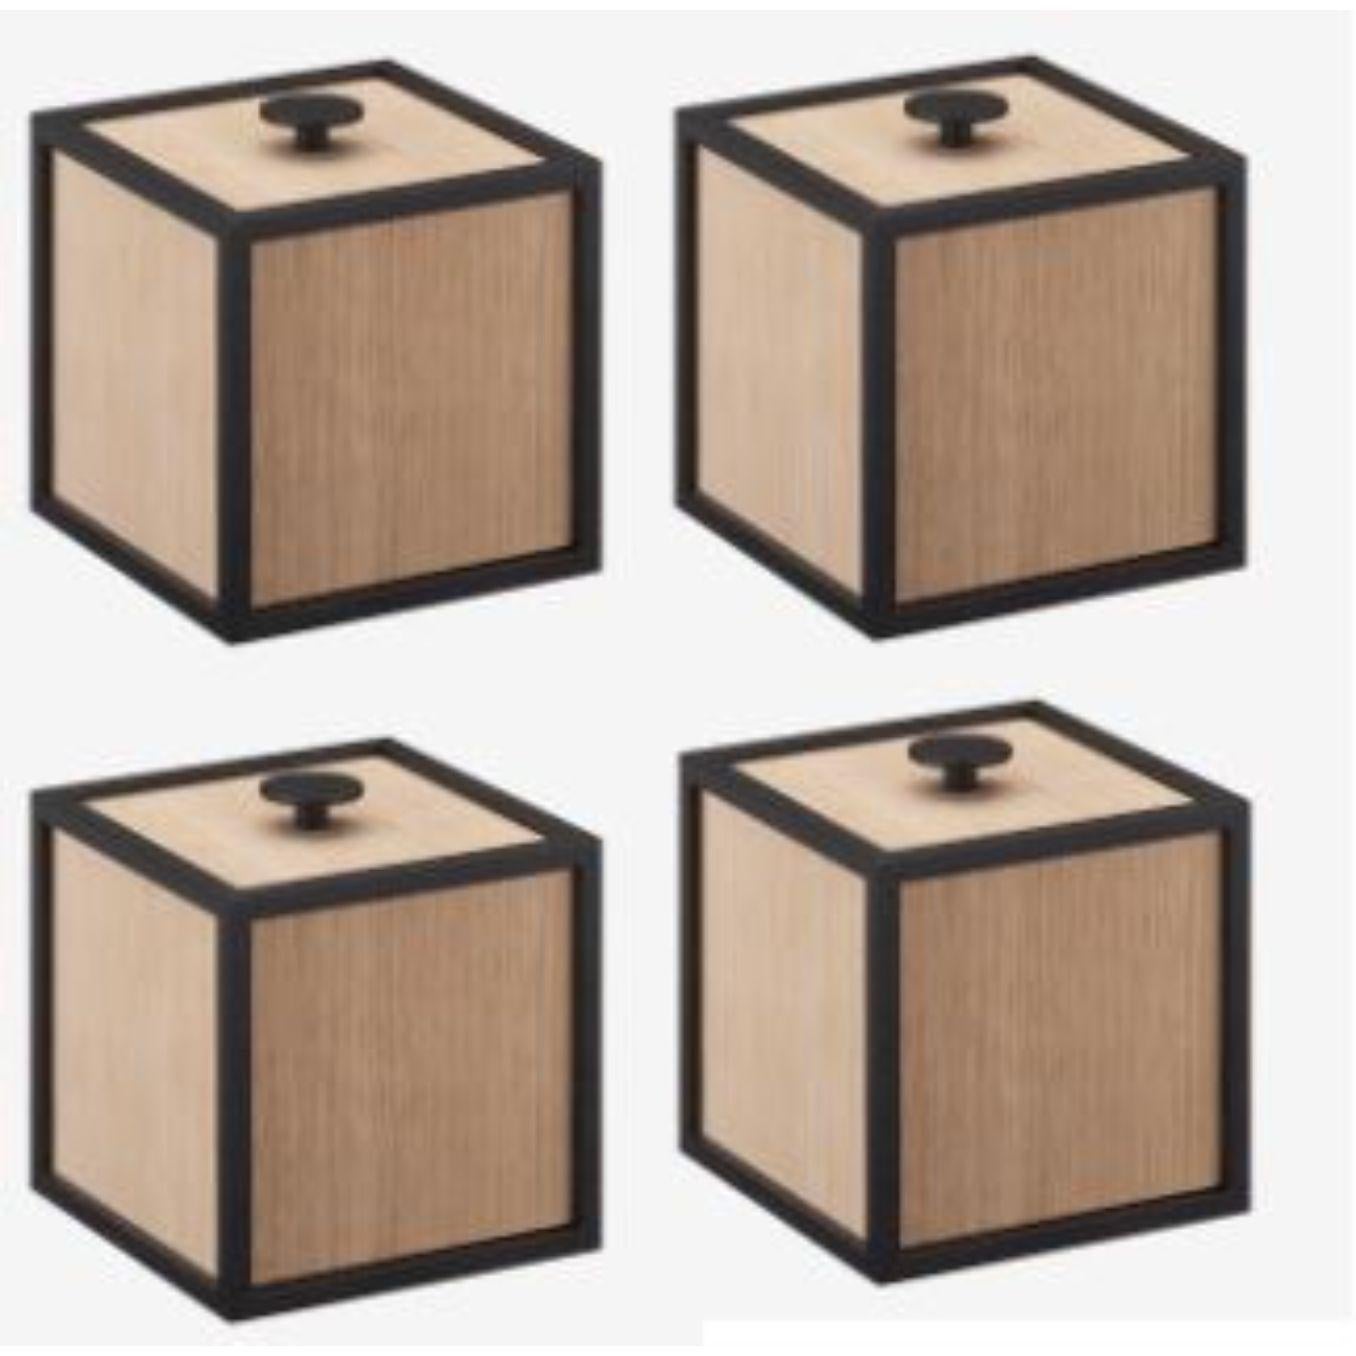 Set of 4 oak frame 10 box by Lassen
Dimensions: D 10 x W 10 x H 10 cm 
Materials: Finér, Melamin, Melamine, Metal, Veneer
Weight: 0.85 Kg

Frame box is a square box in a cubistic shape. The simple boxes are inspired by the Kubus candleholder by